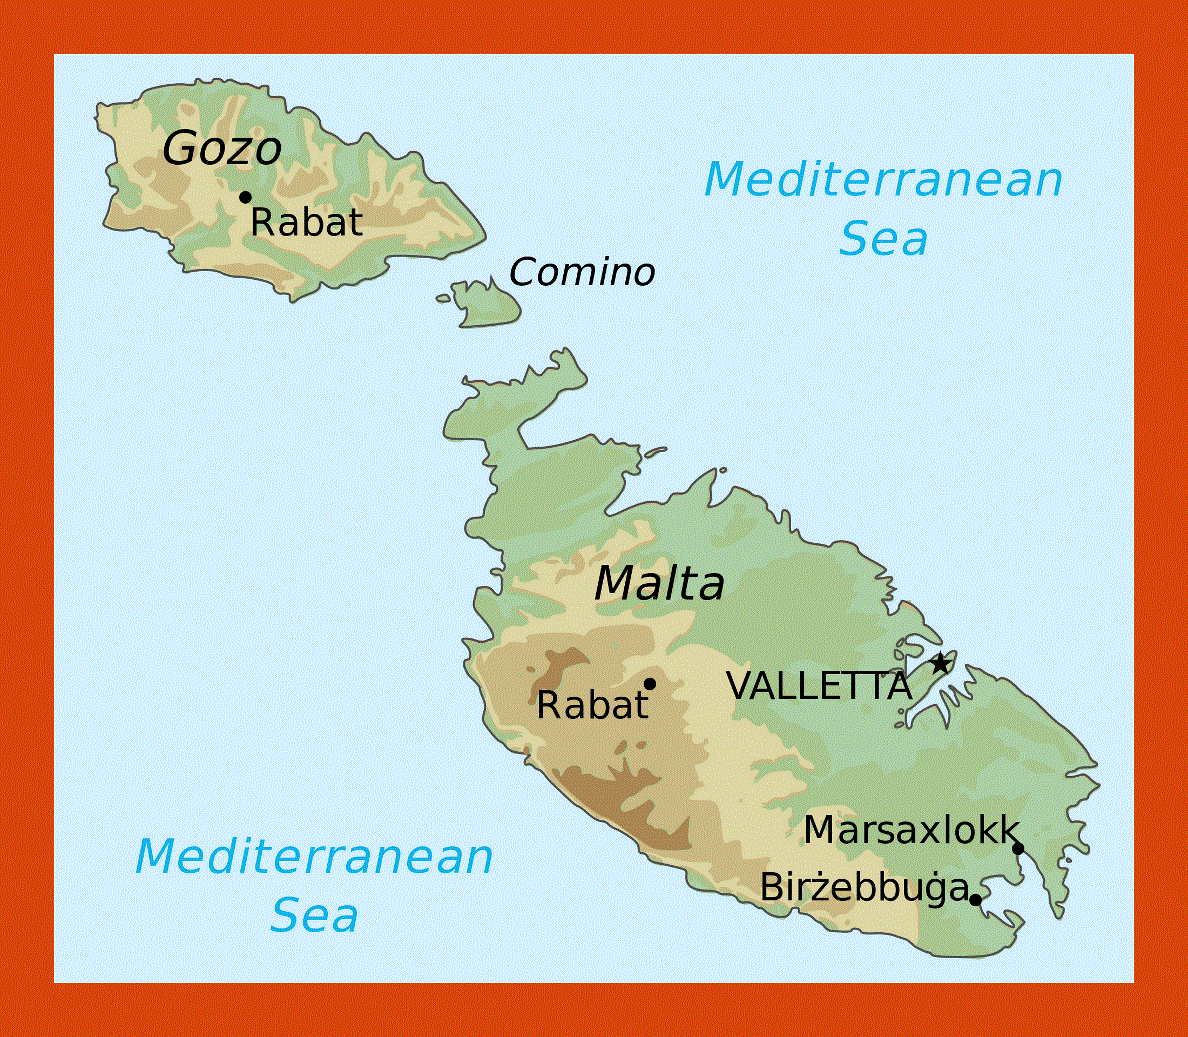 Elevation map of Malta and Gozo